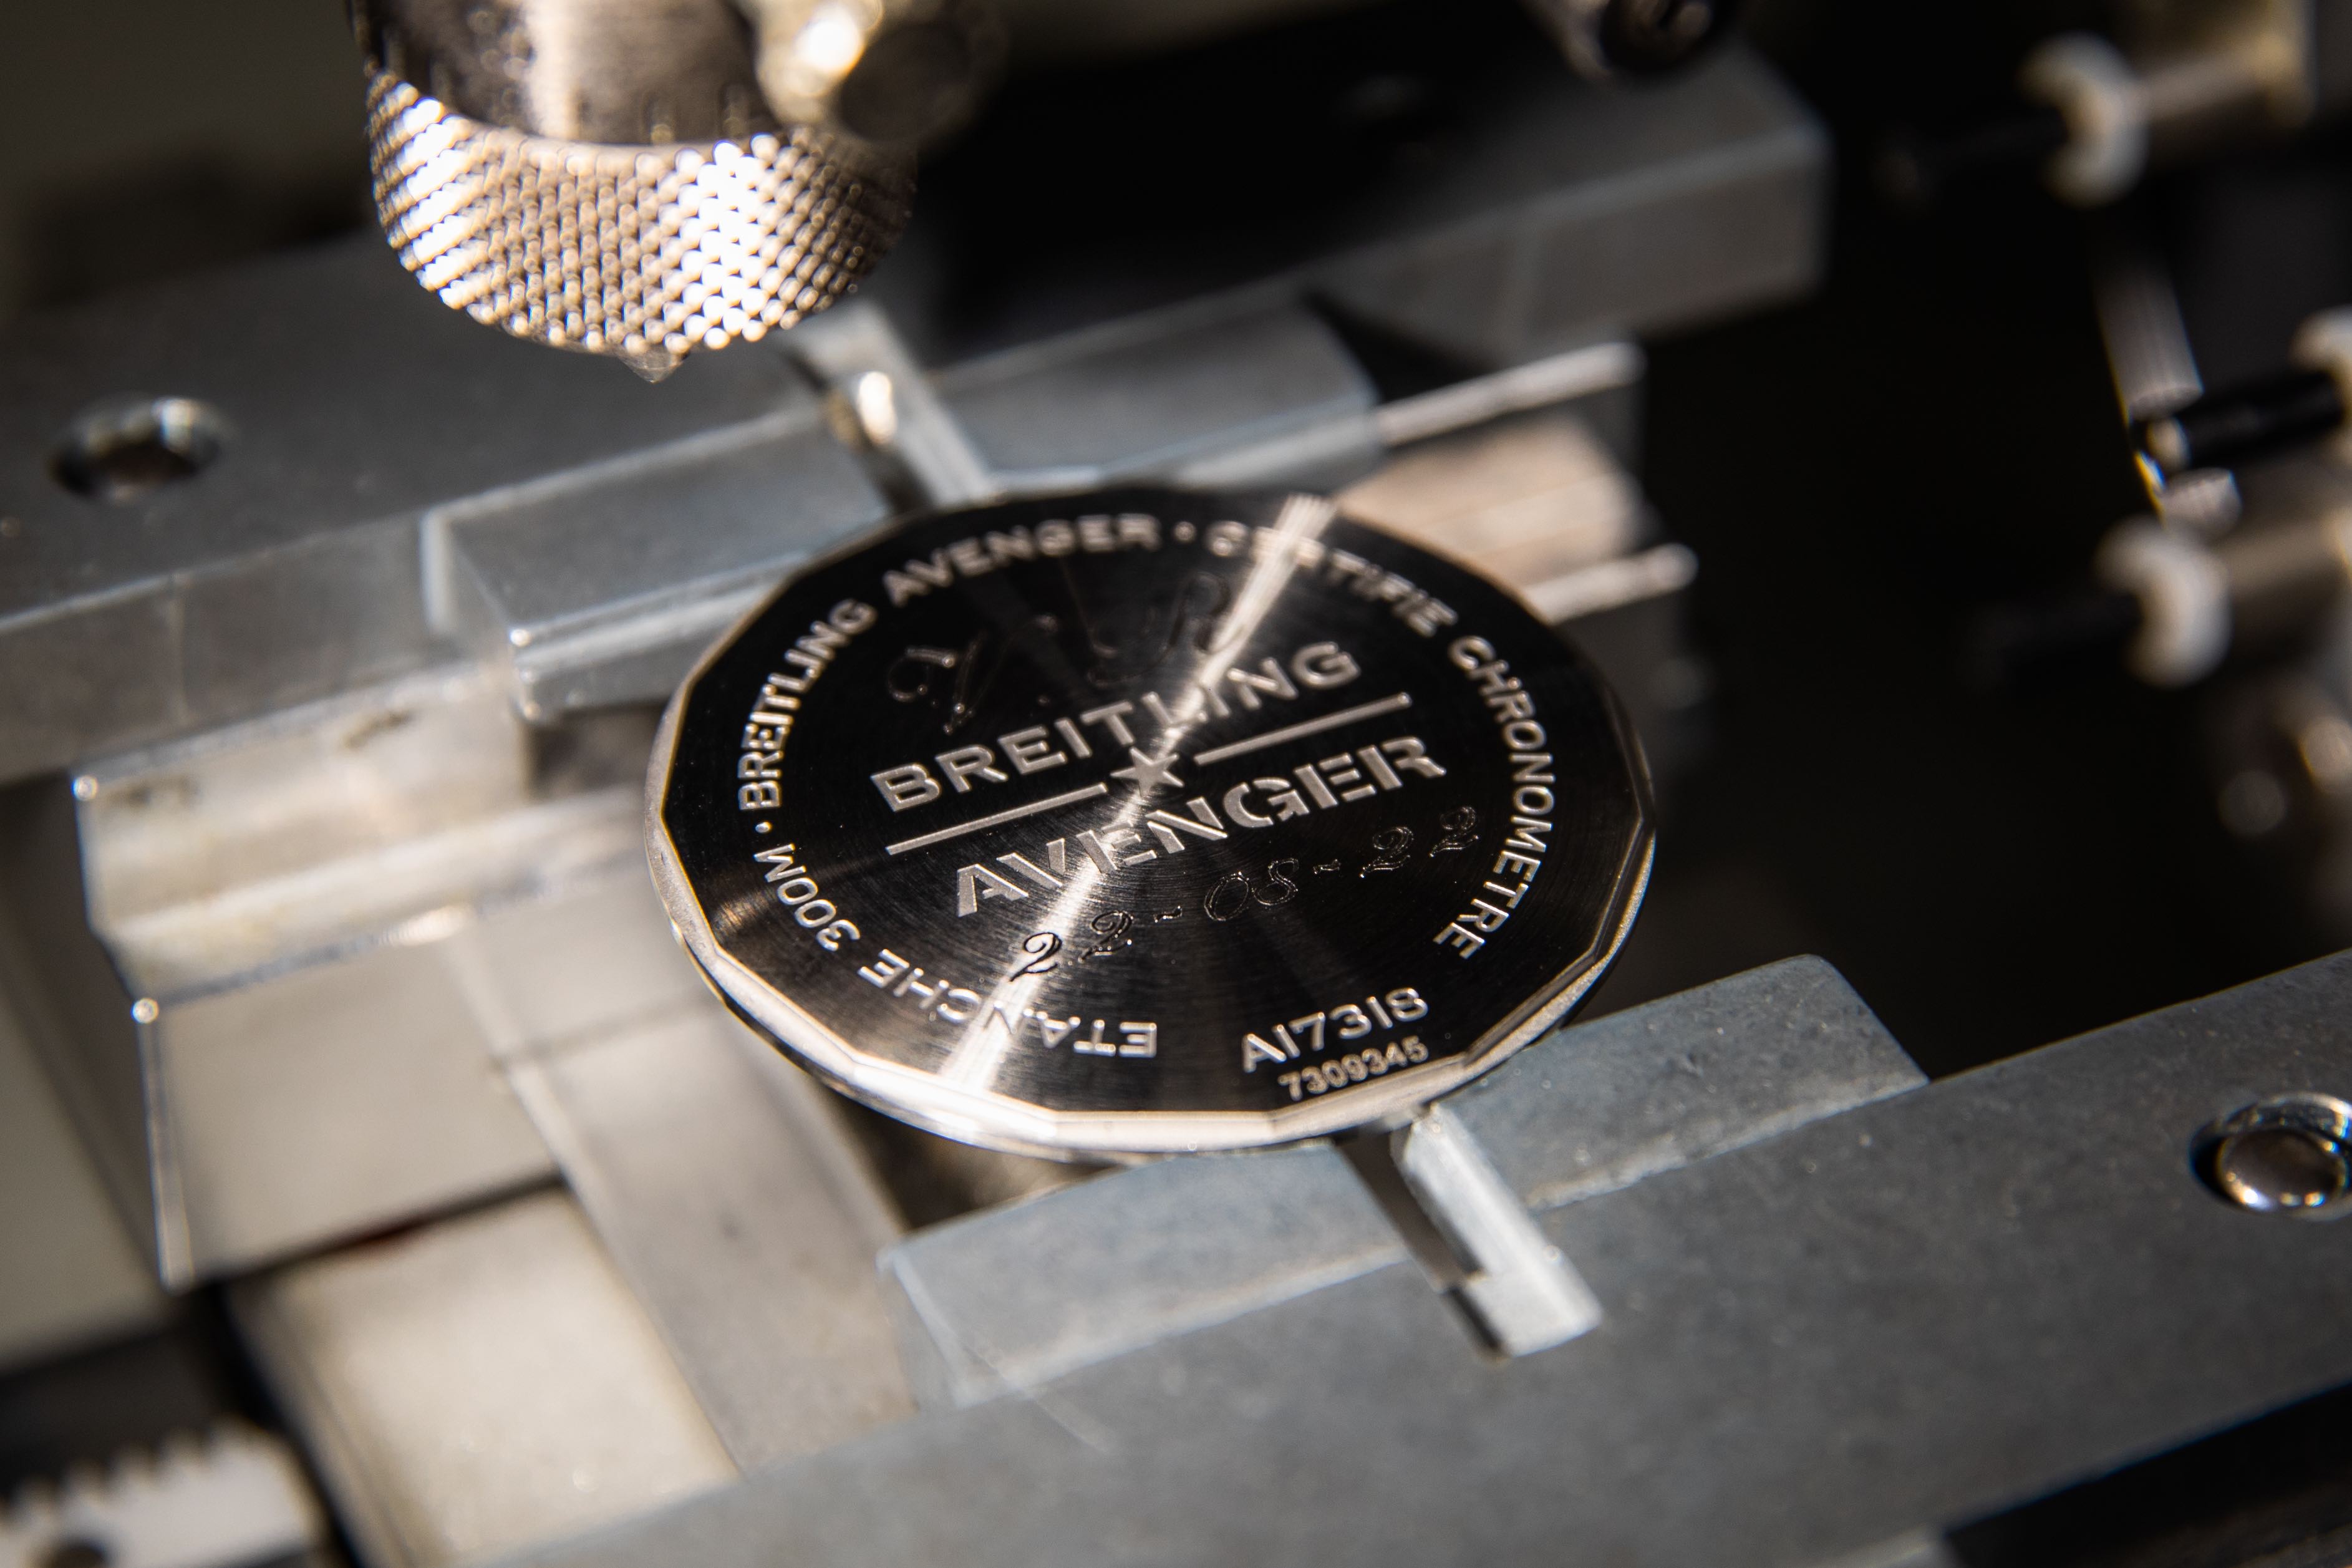 Step 5: Engraving your watch